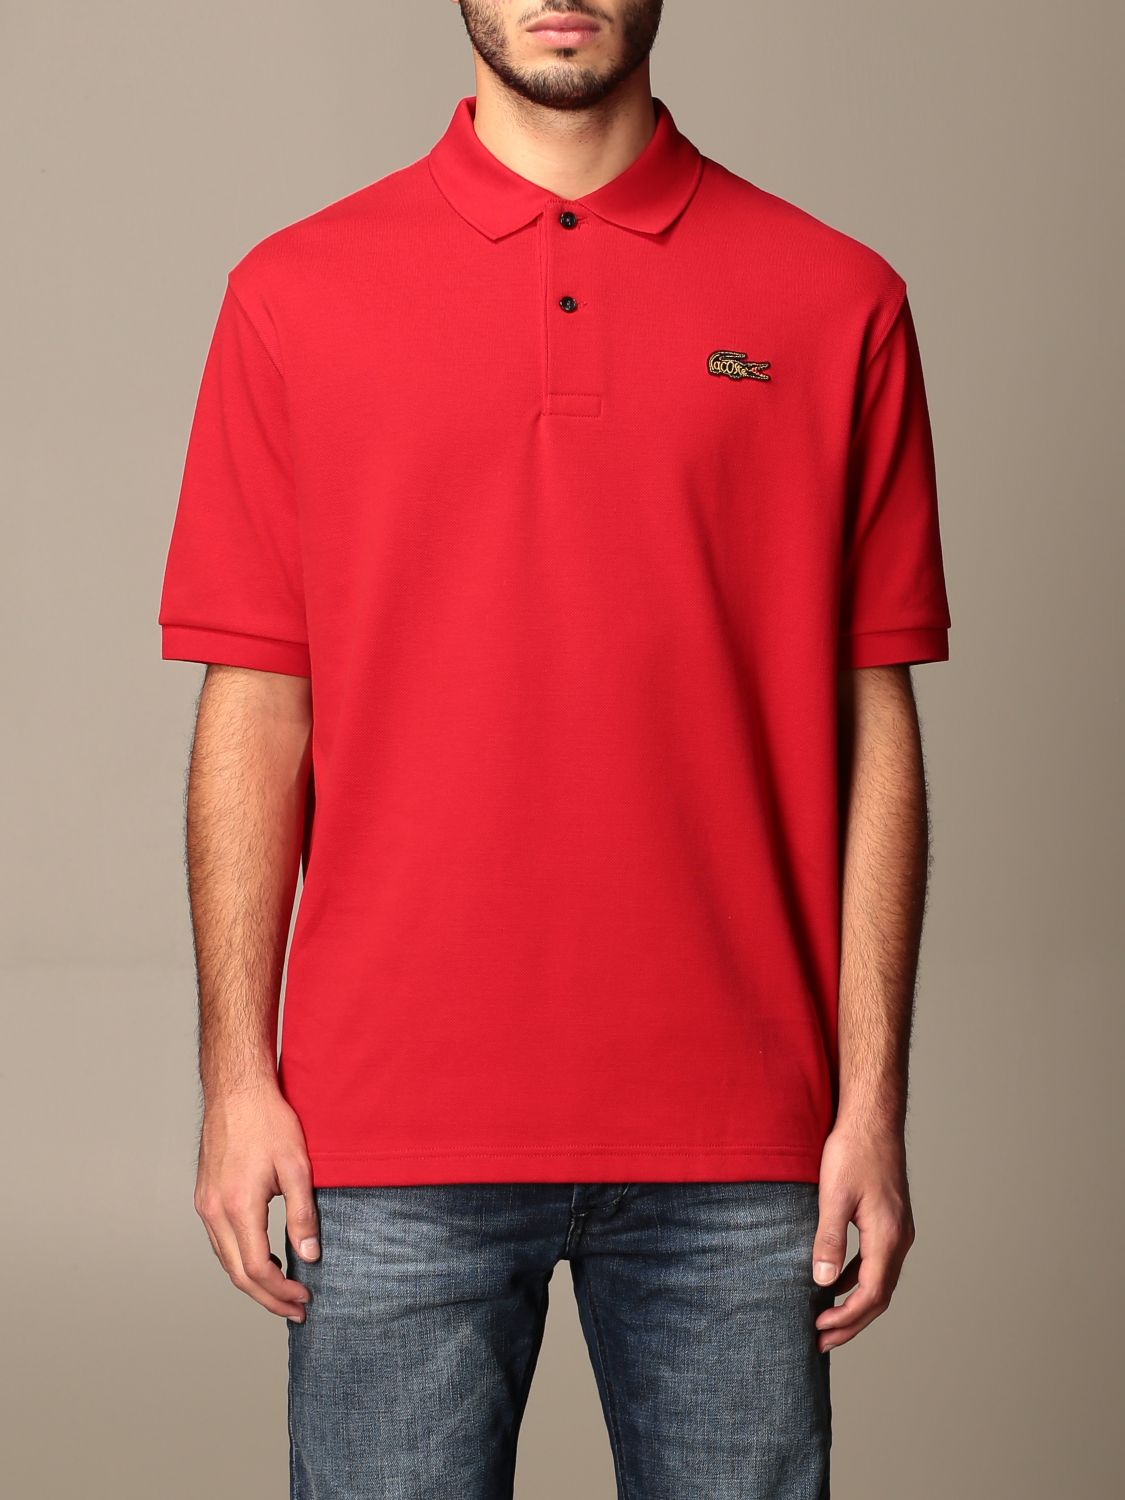 Ve Outlet: Polo homme | Polo Lacoste 